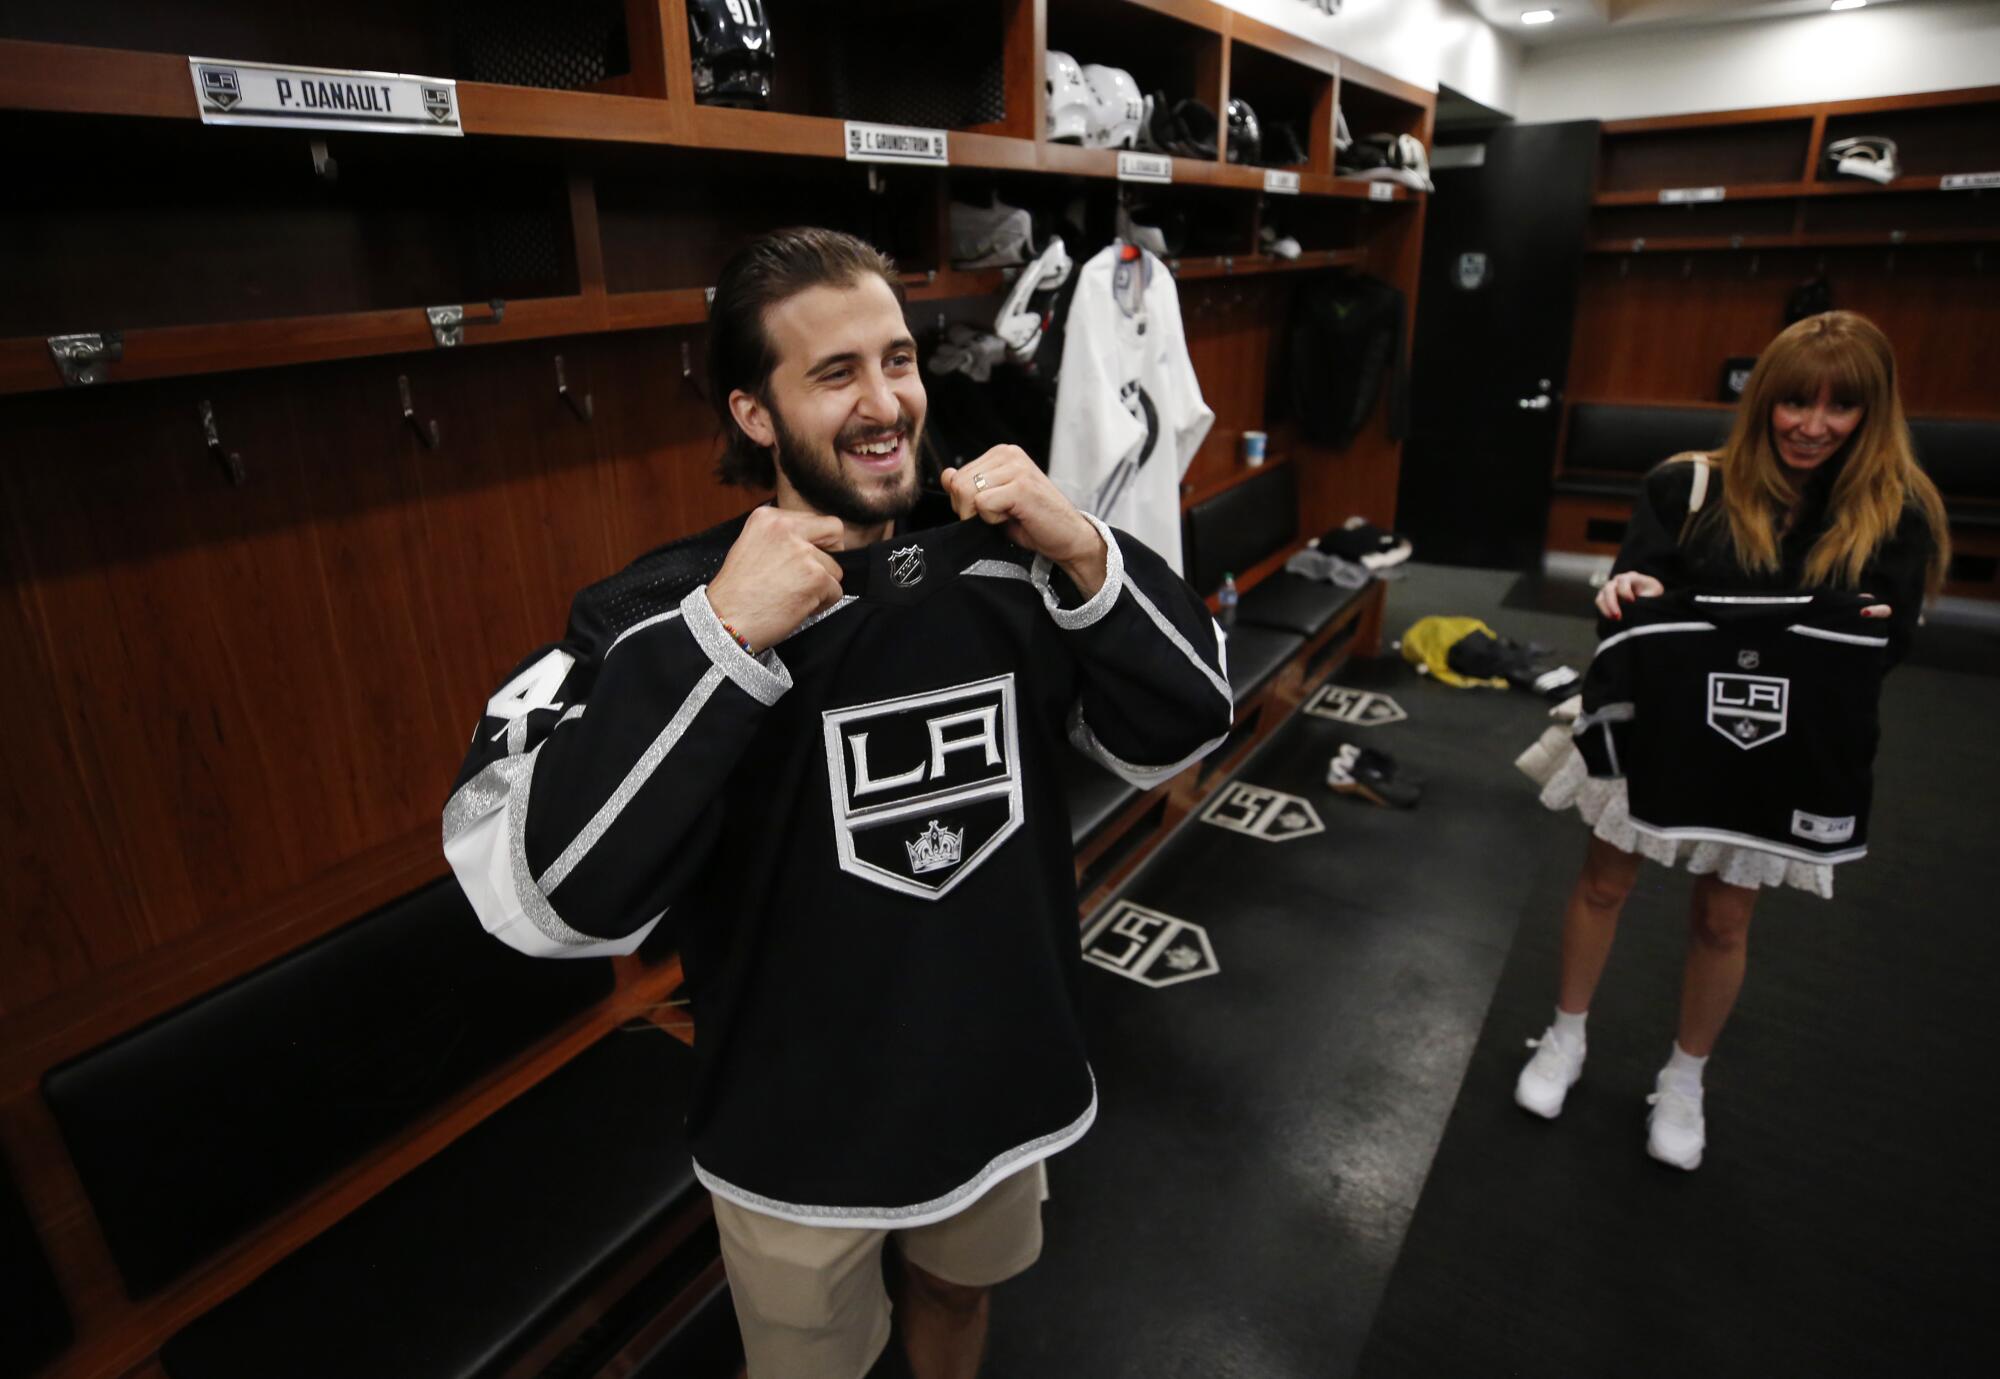 New Kings player Phillip Danault tries on his team jersey during a tour of the locker room. At right is his wife, Marie.